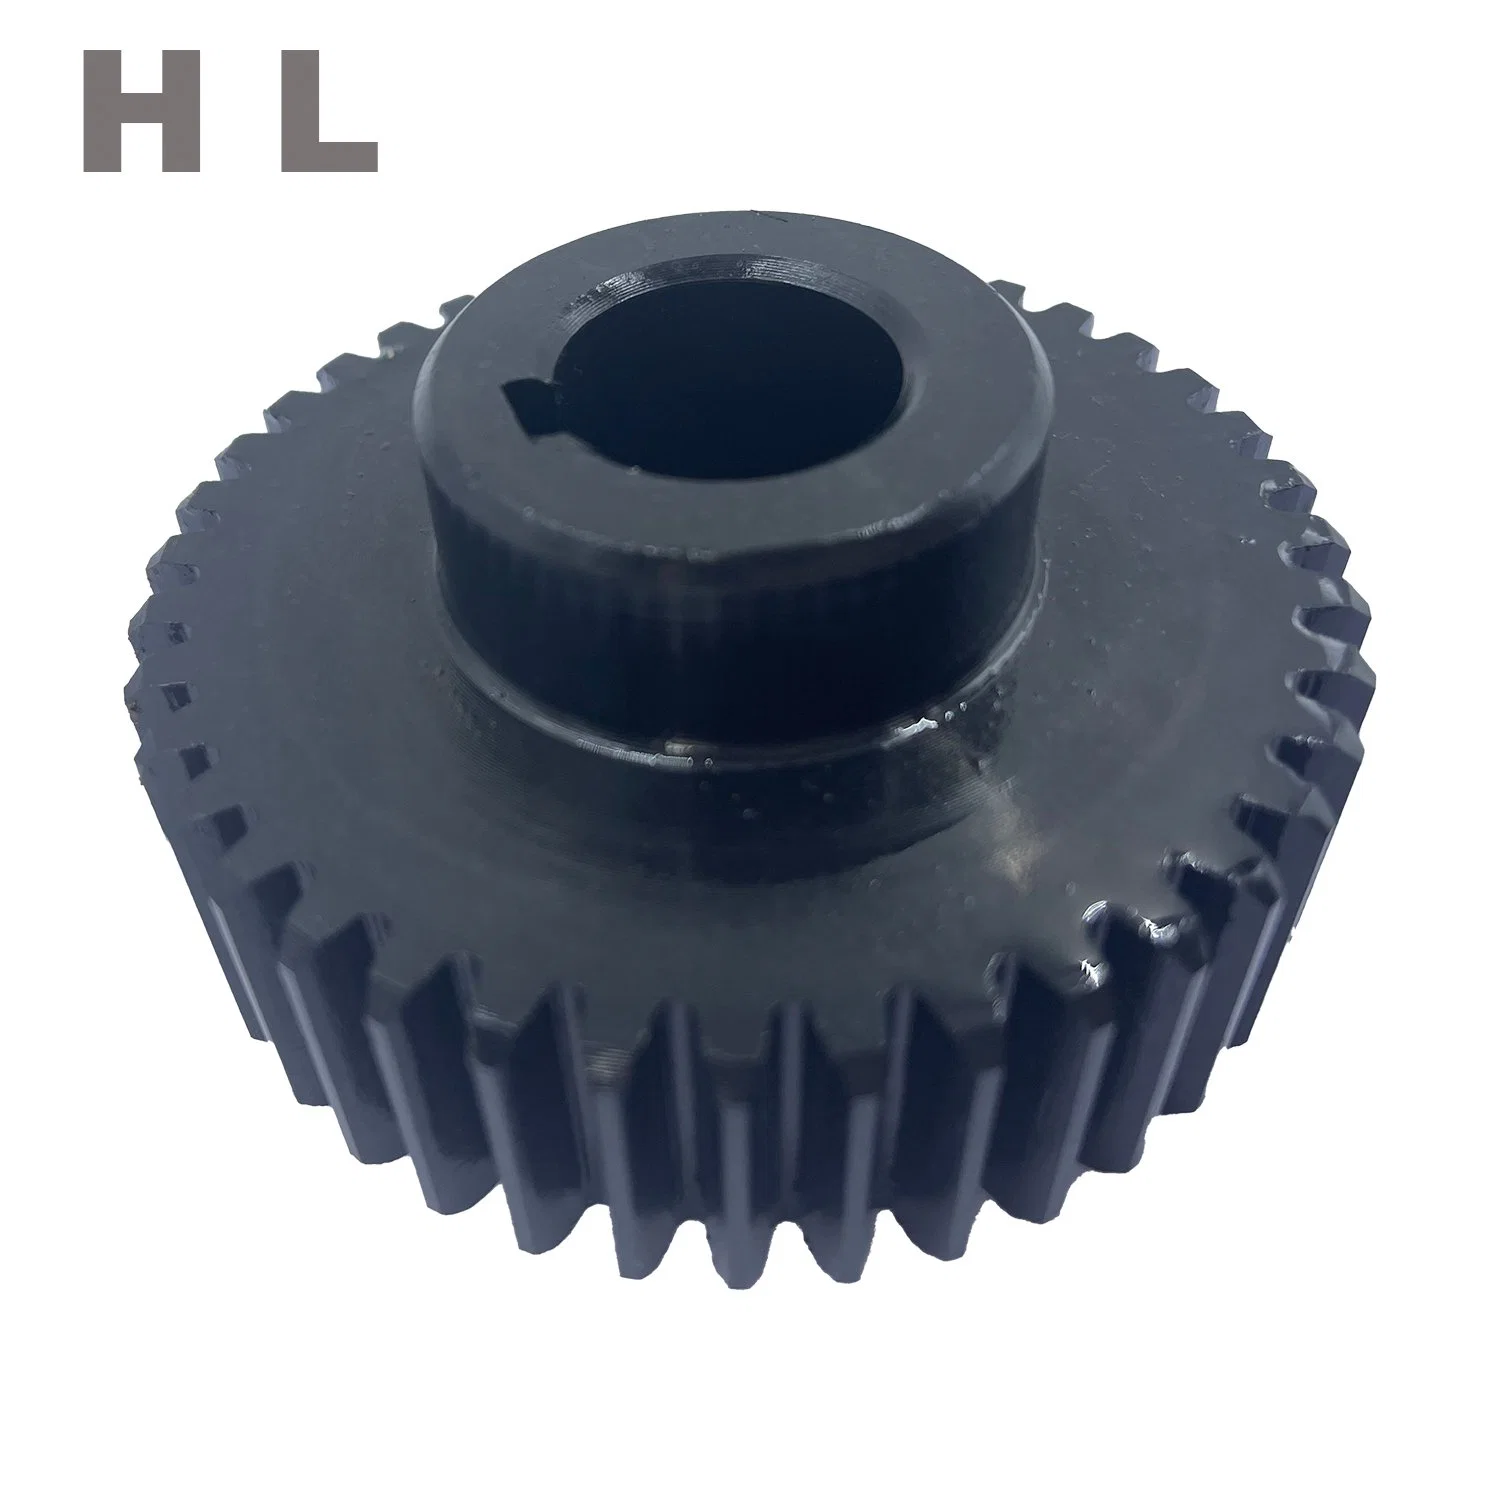 Power Transmission Harden Parts Available